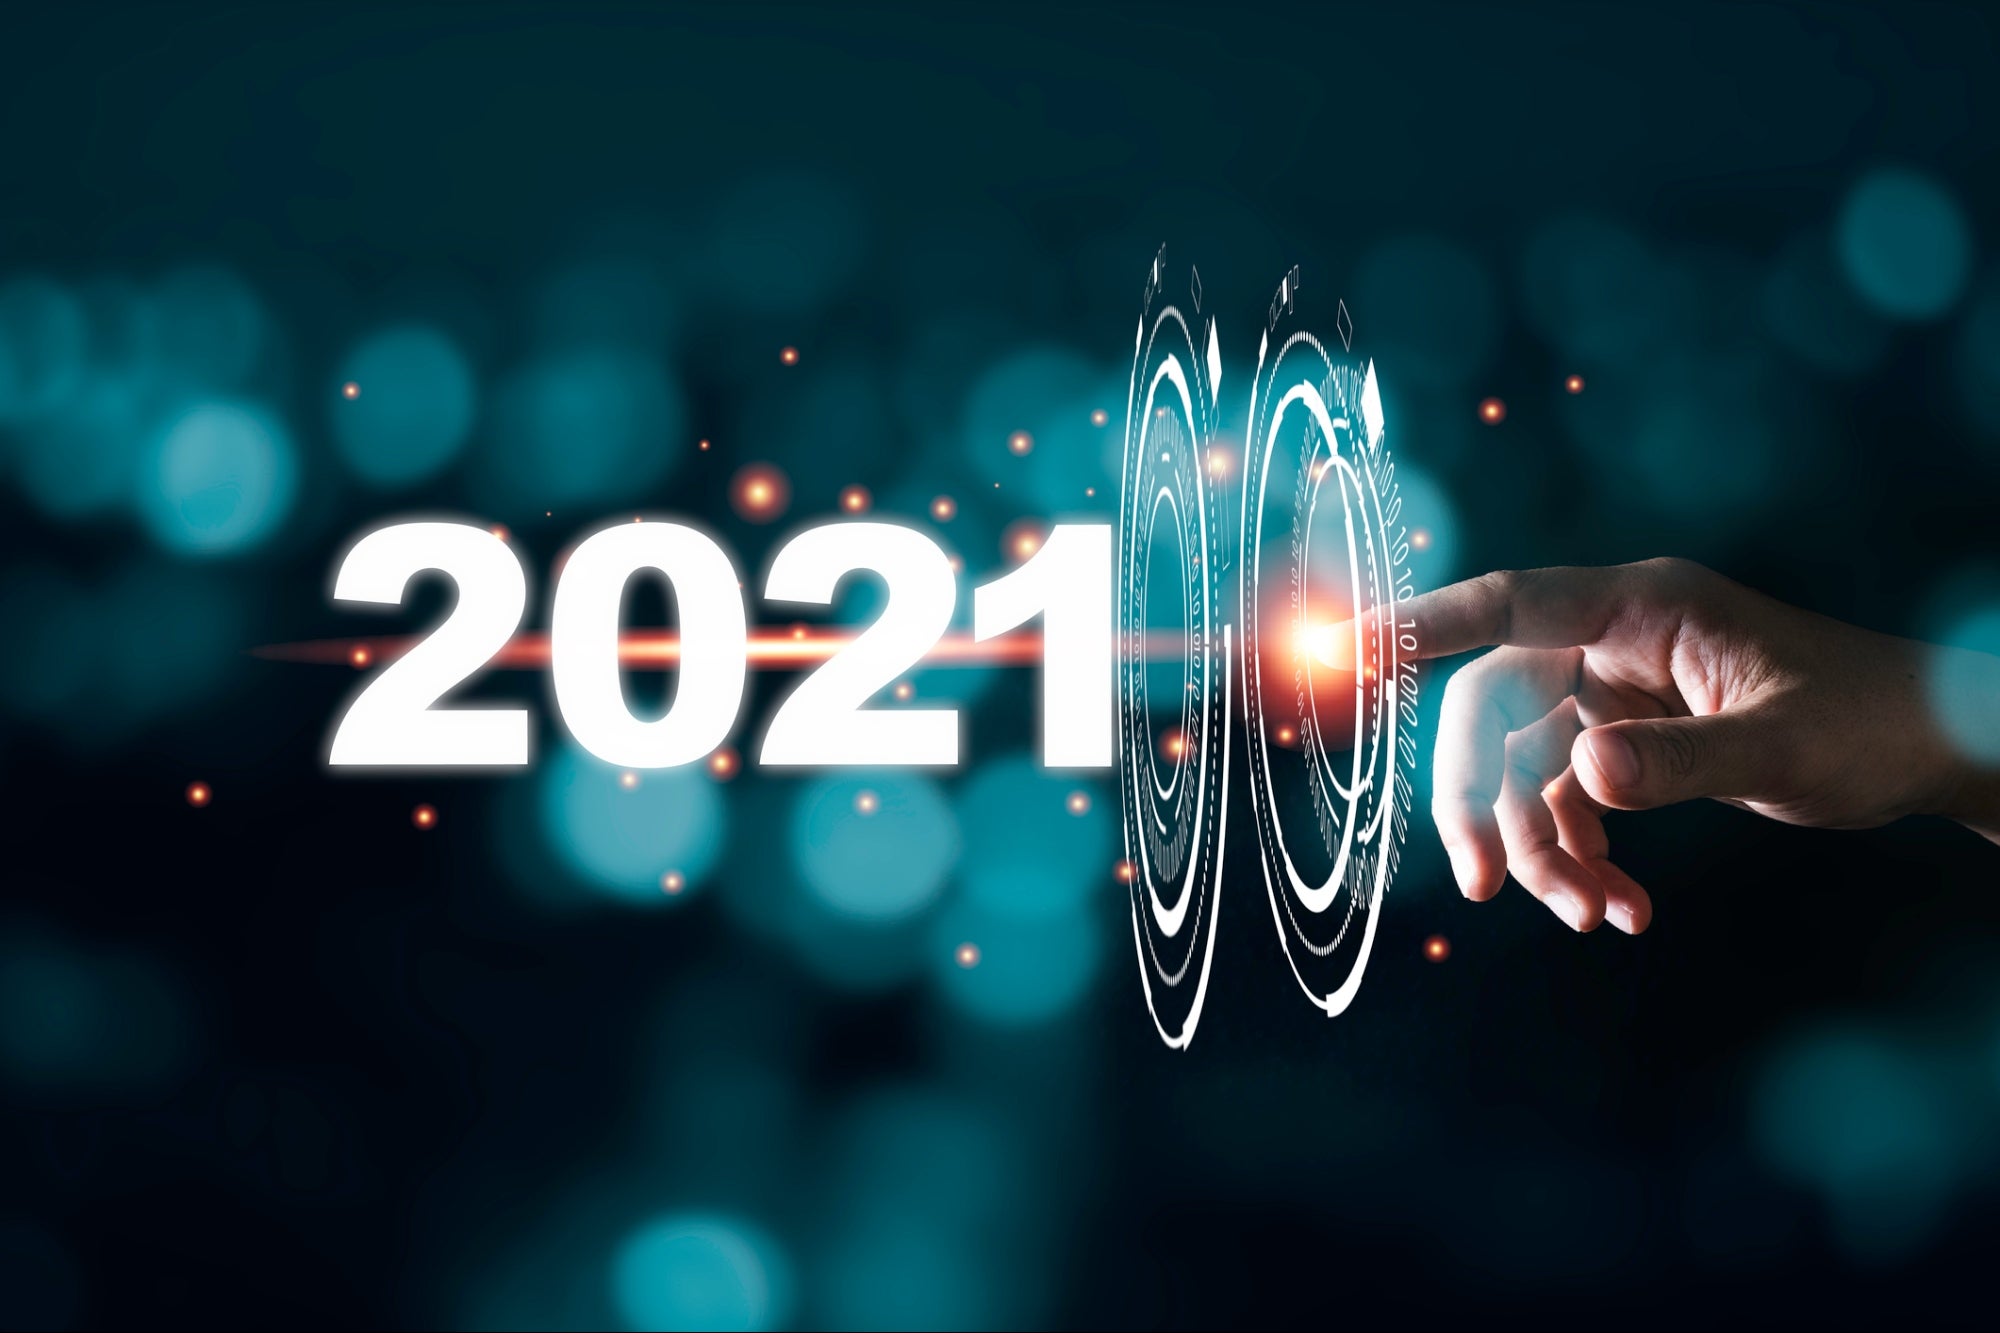 5 Trends That Can Transform the Way You Do Business in 2021